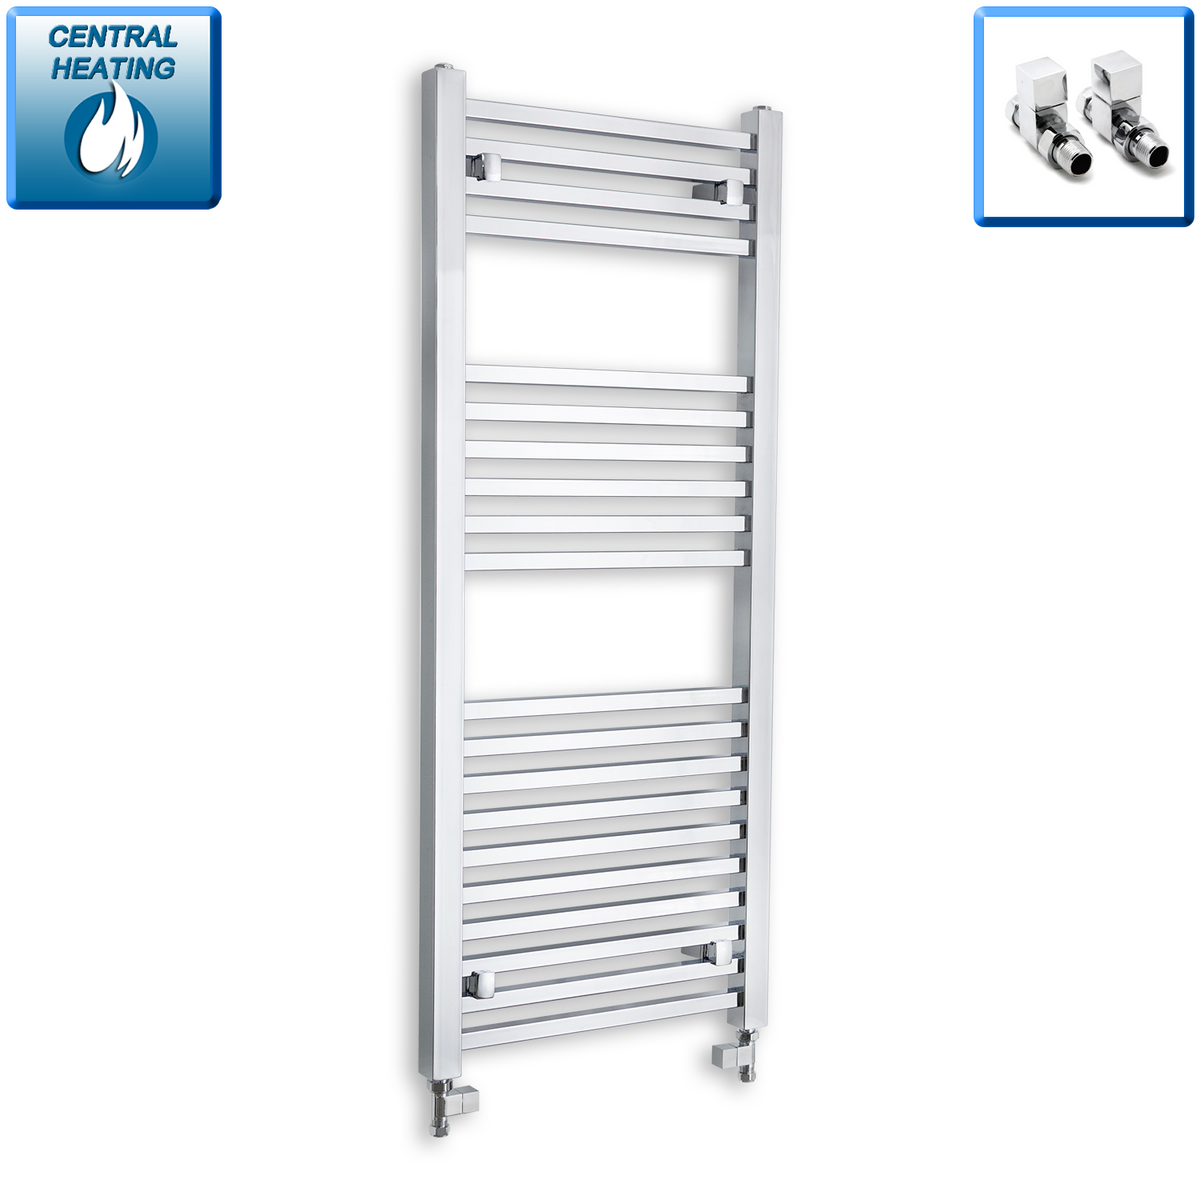 1200 x 500 Ladder Type Square Tube Flat Chrome Towel Radiator Central Heating or Electric